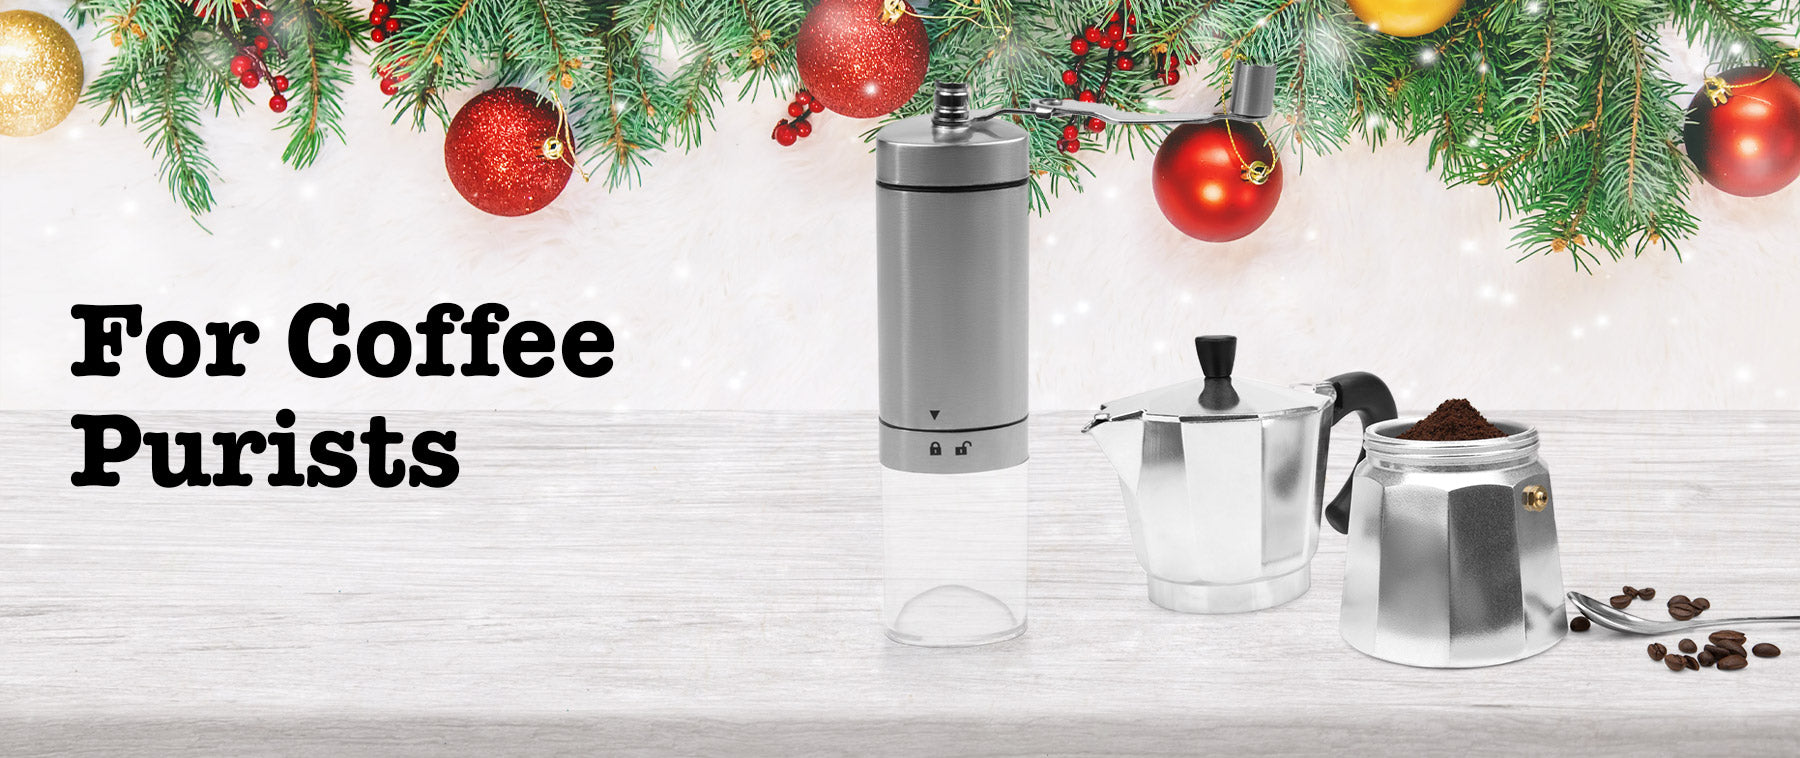 Other Coffee Brewing Gifts - EspressoWorks Holiday Gift Guide for Coffee Lovers